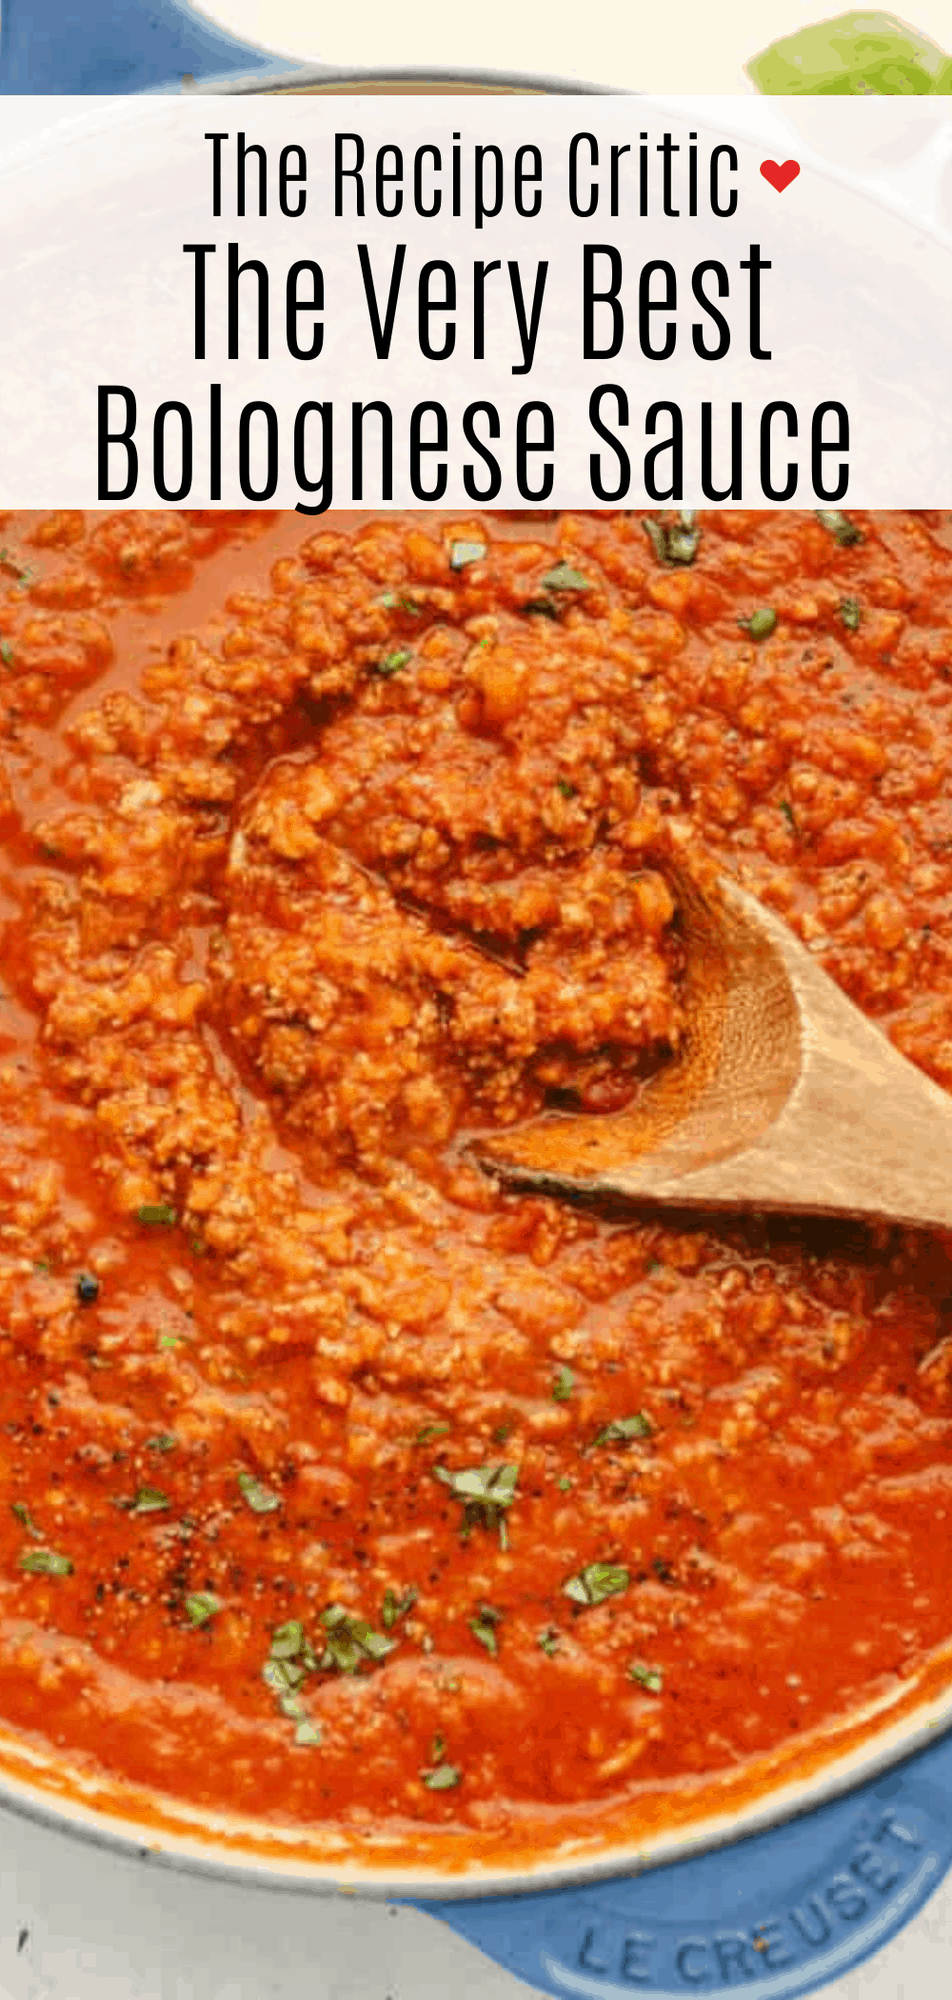 https://therecipecritic.com/wp-content/uploads/2021/08/Bolognese-Sauce-1.png